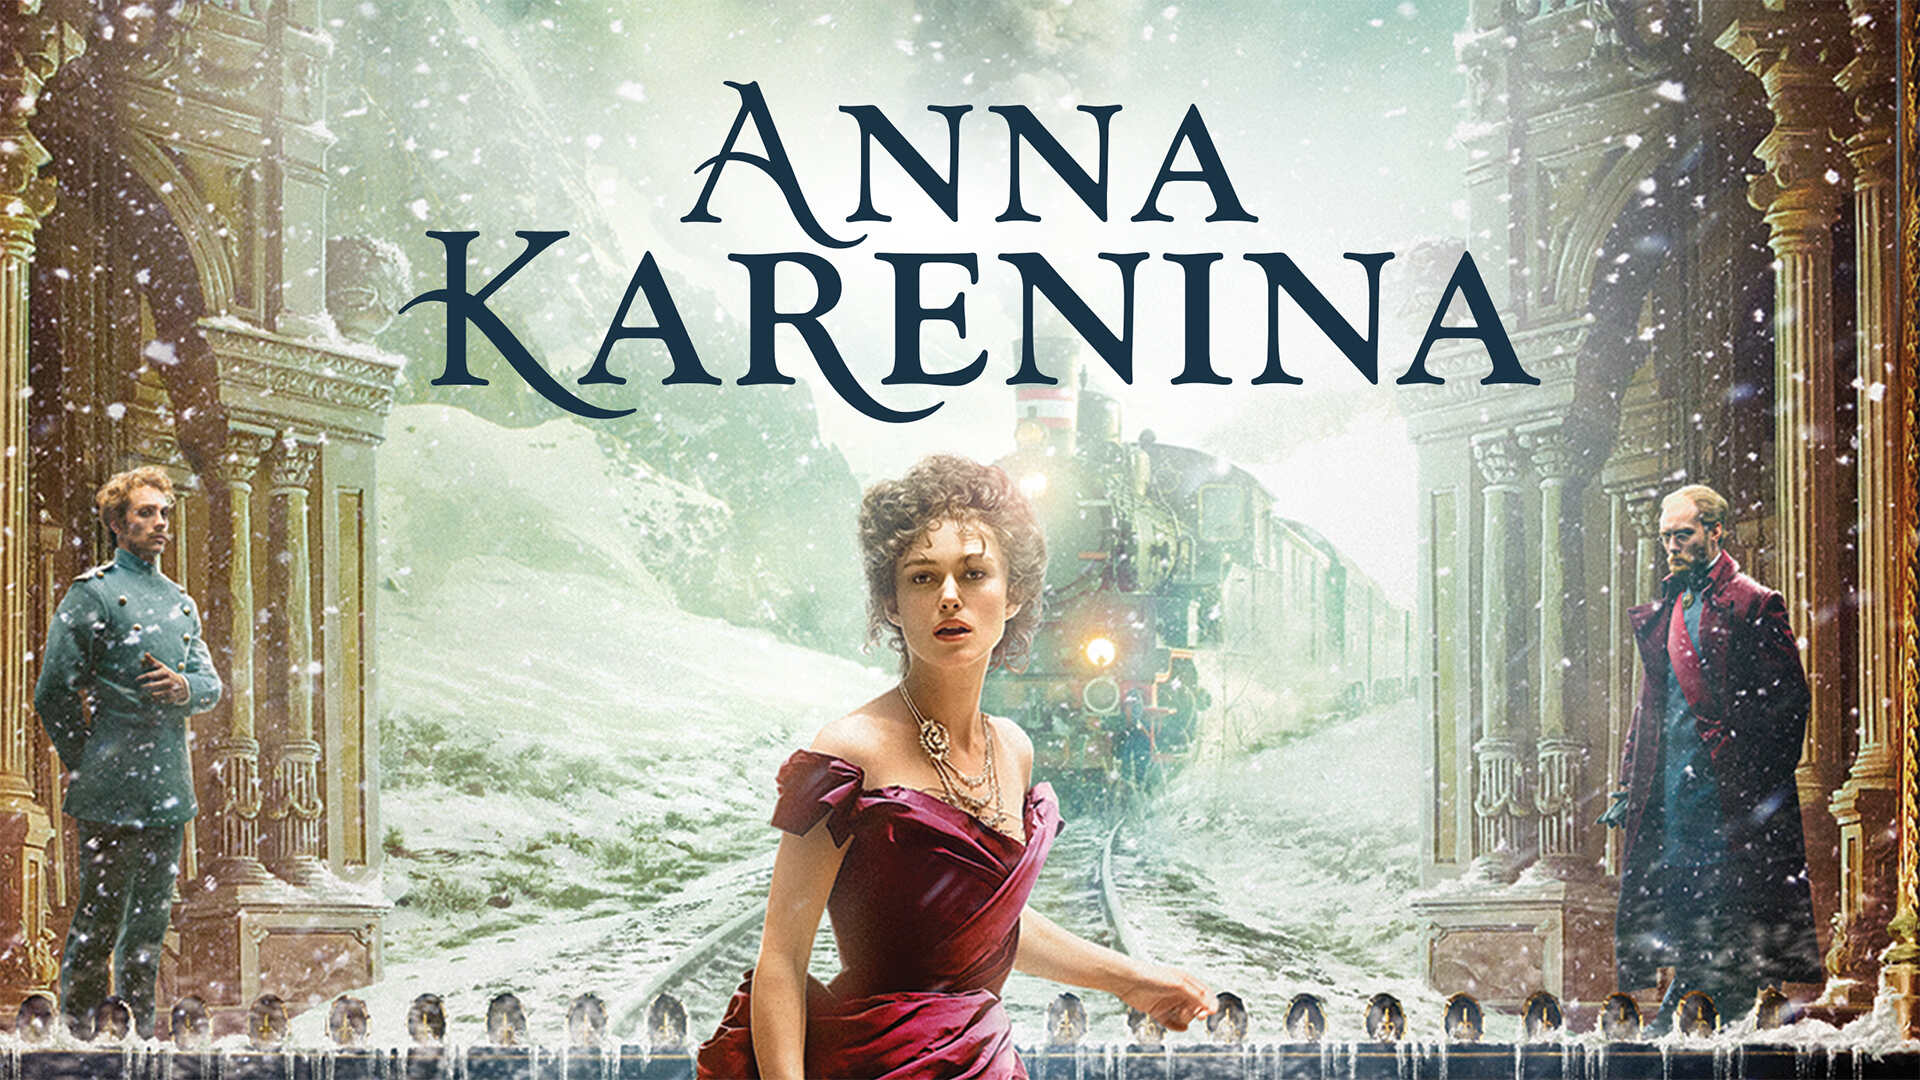 48-facts-about-the-movie-anna-karenina